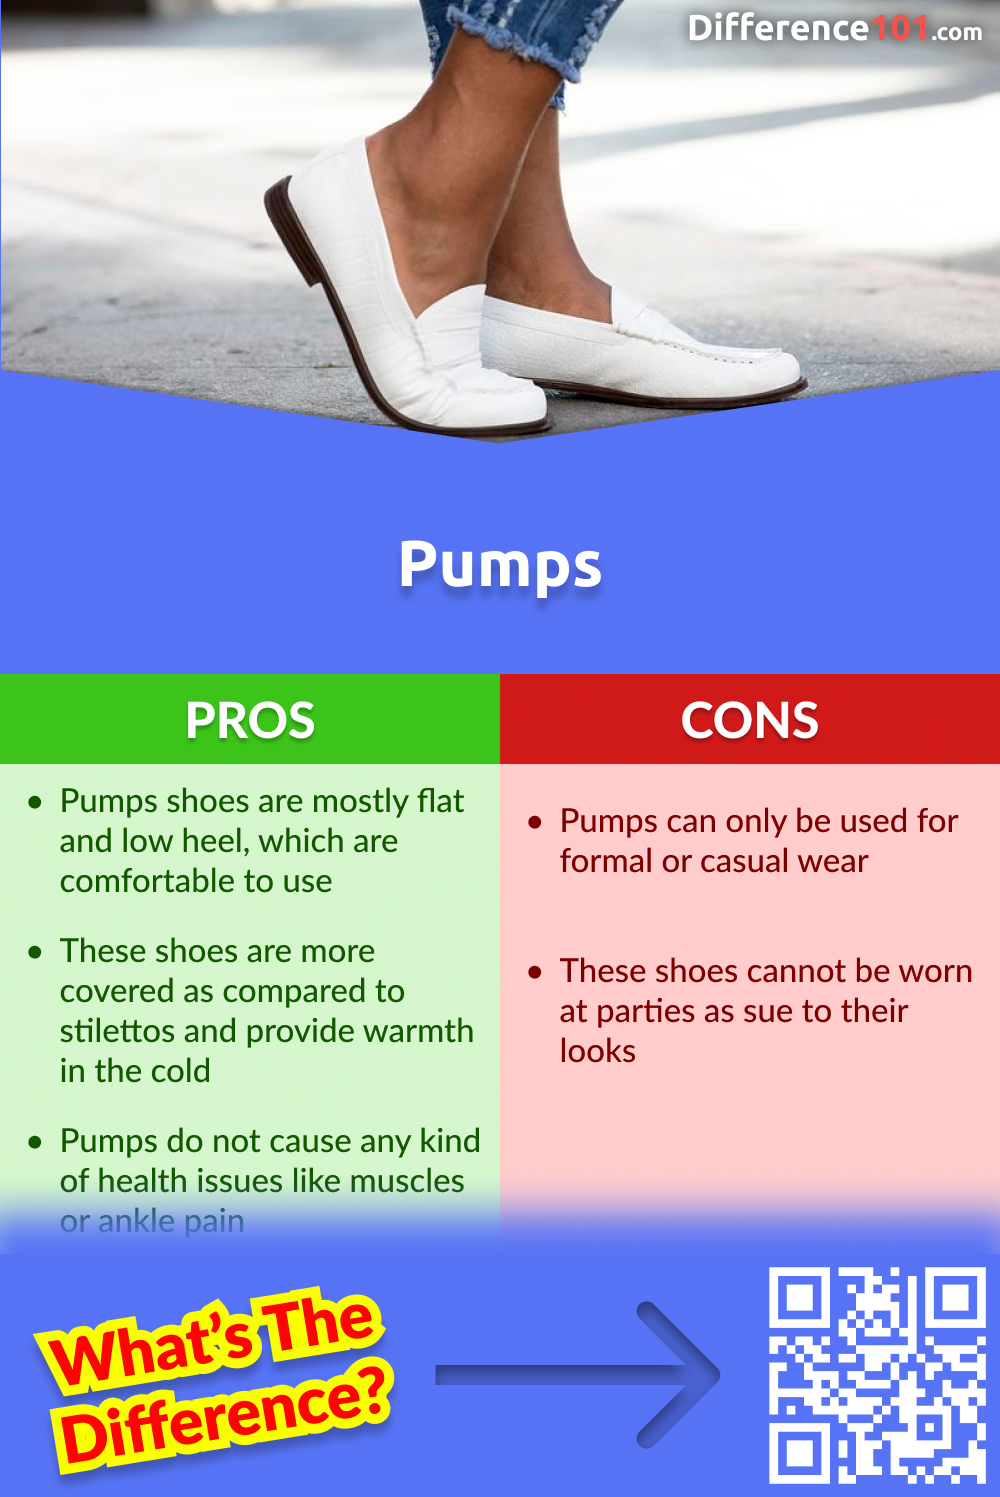 Pros and cons of Pumps